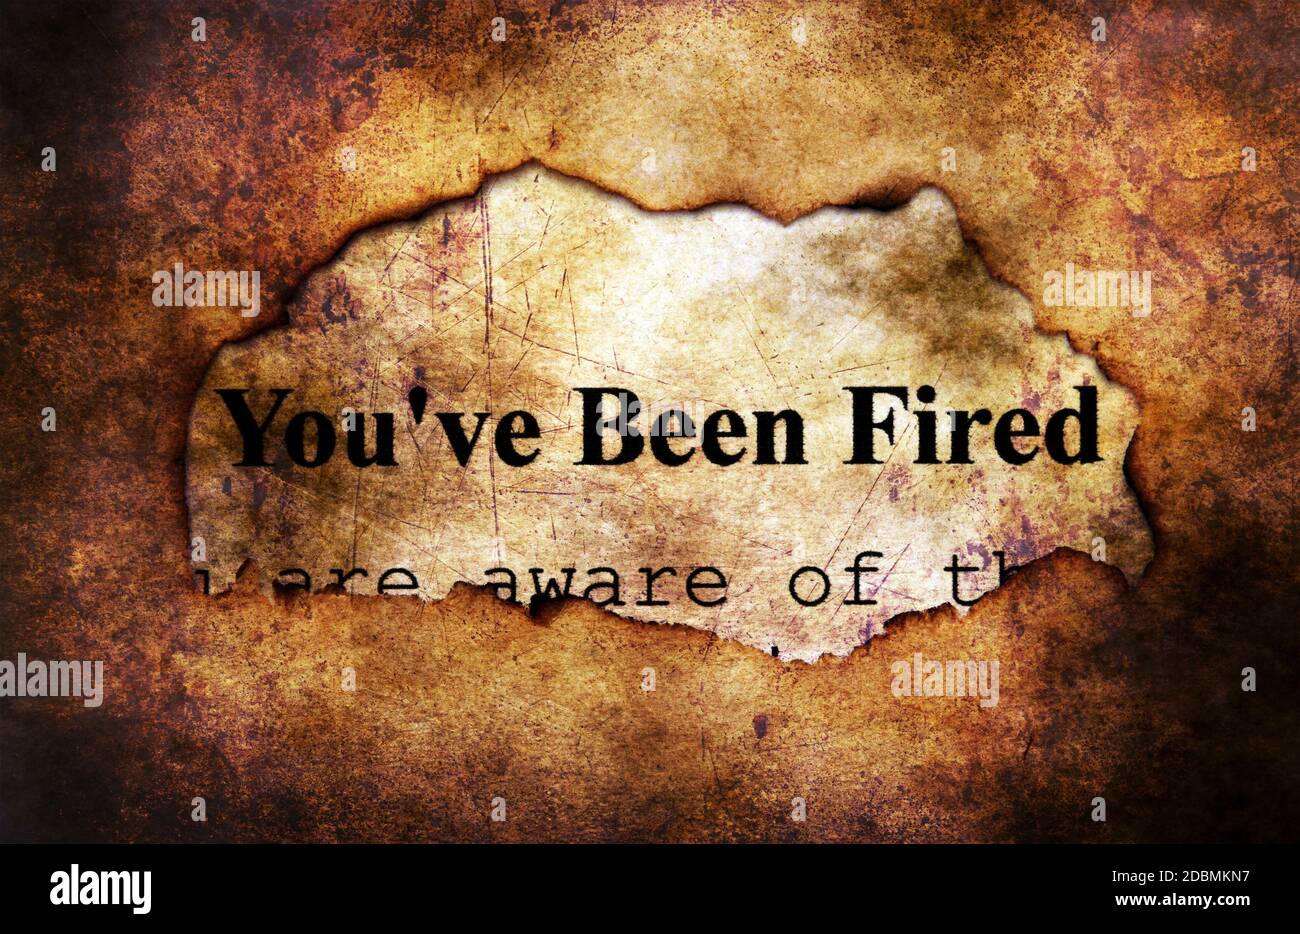 You are fired text on grunge background Stock Photo